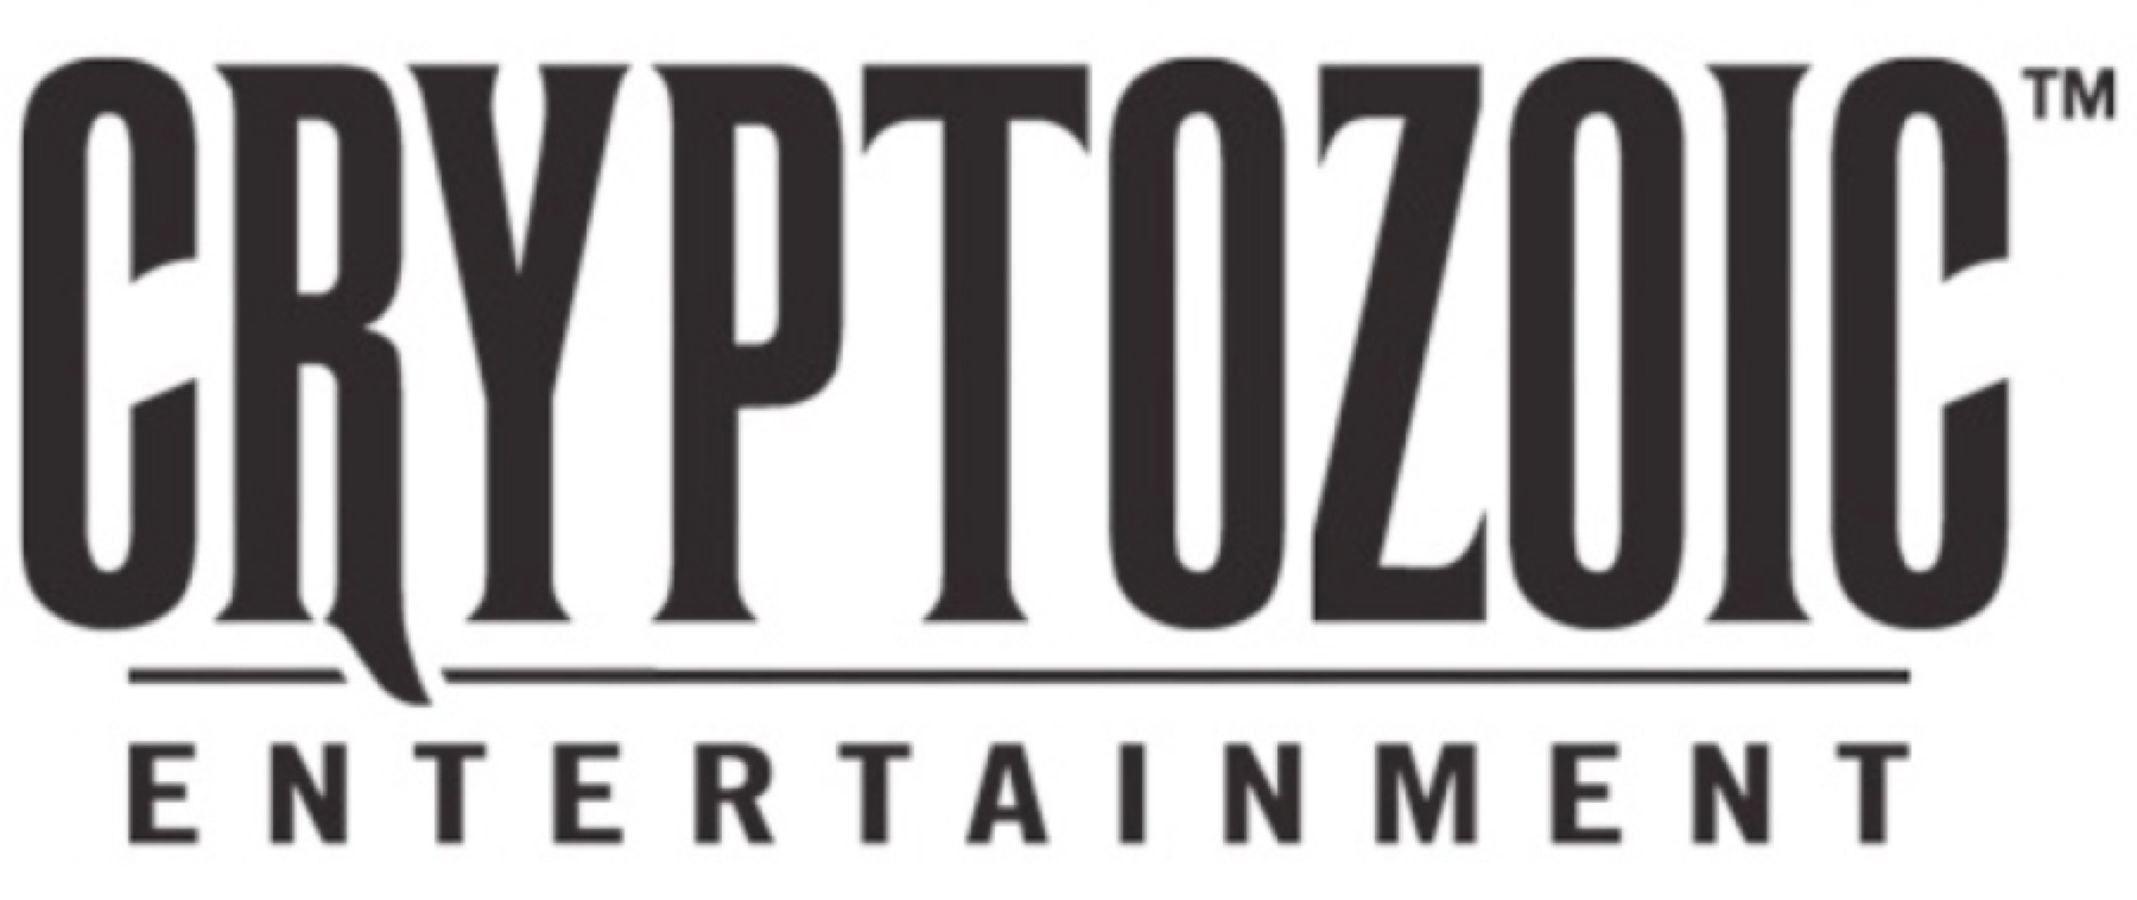 CRY29828 Rotten Tomatoes - The Card Game - Cryptozoic Entertainment - Titan Pop Culture